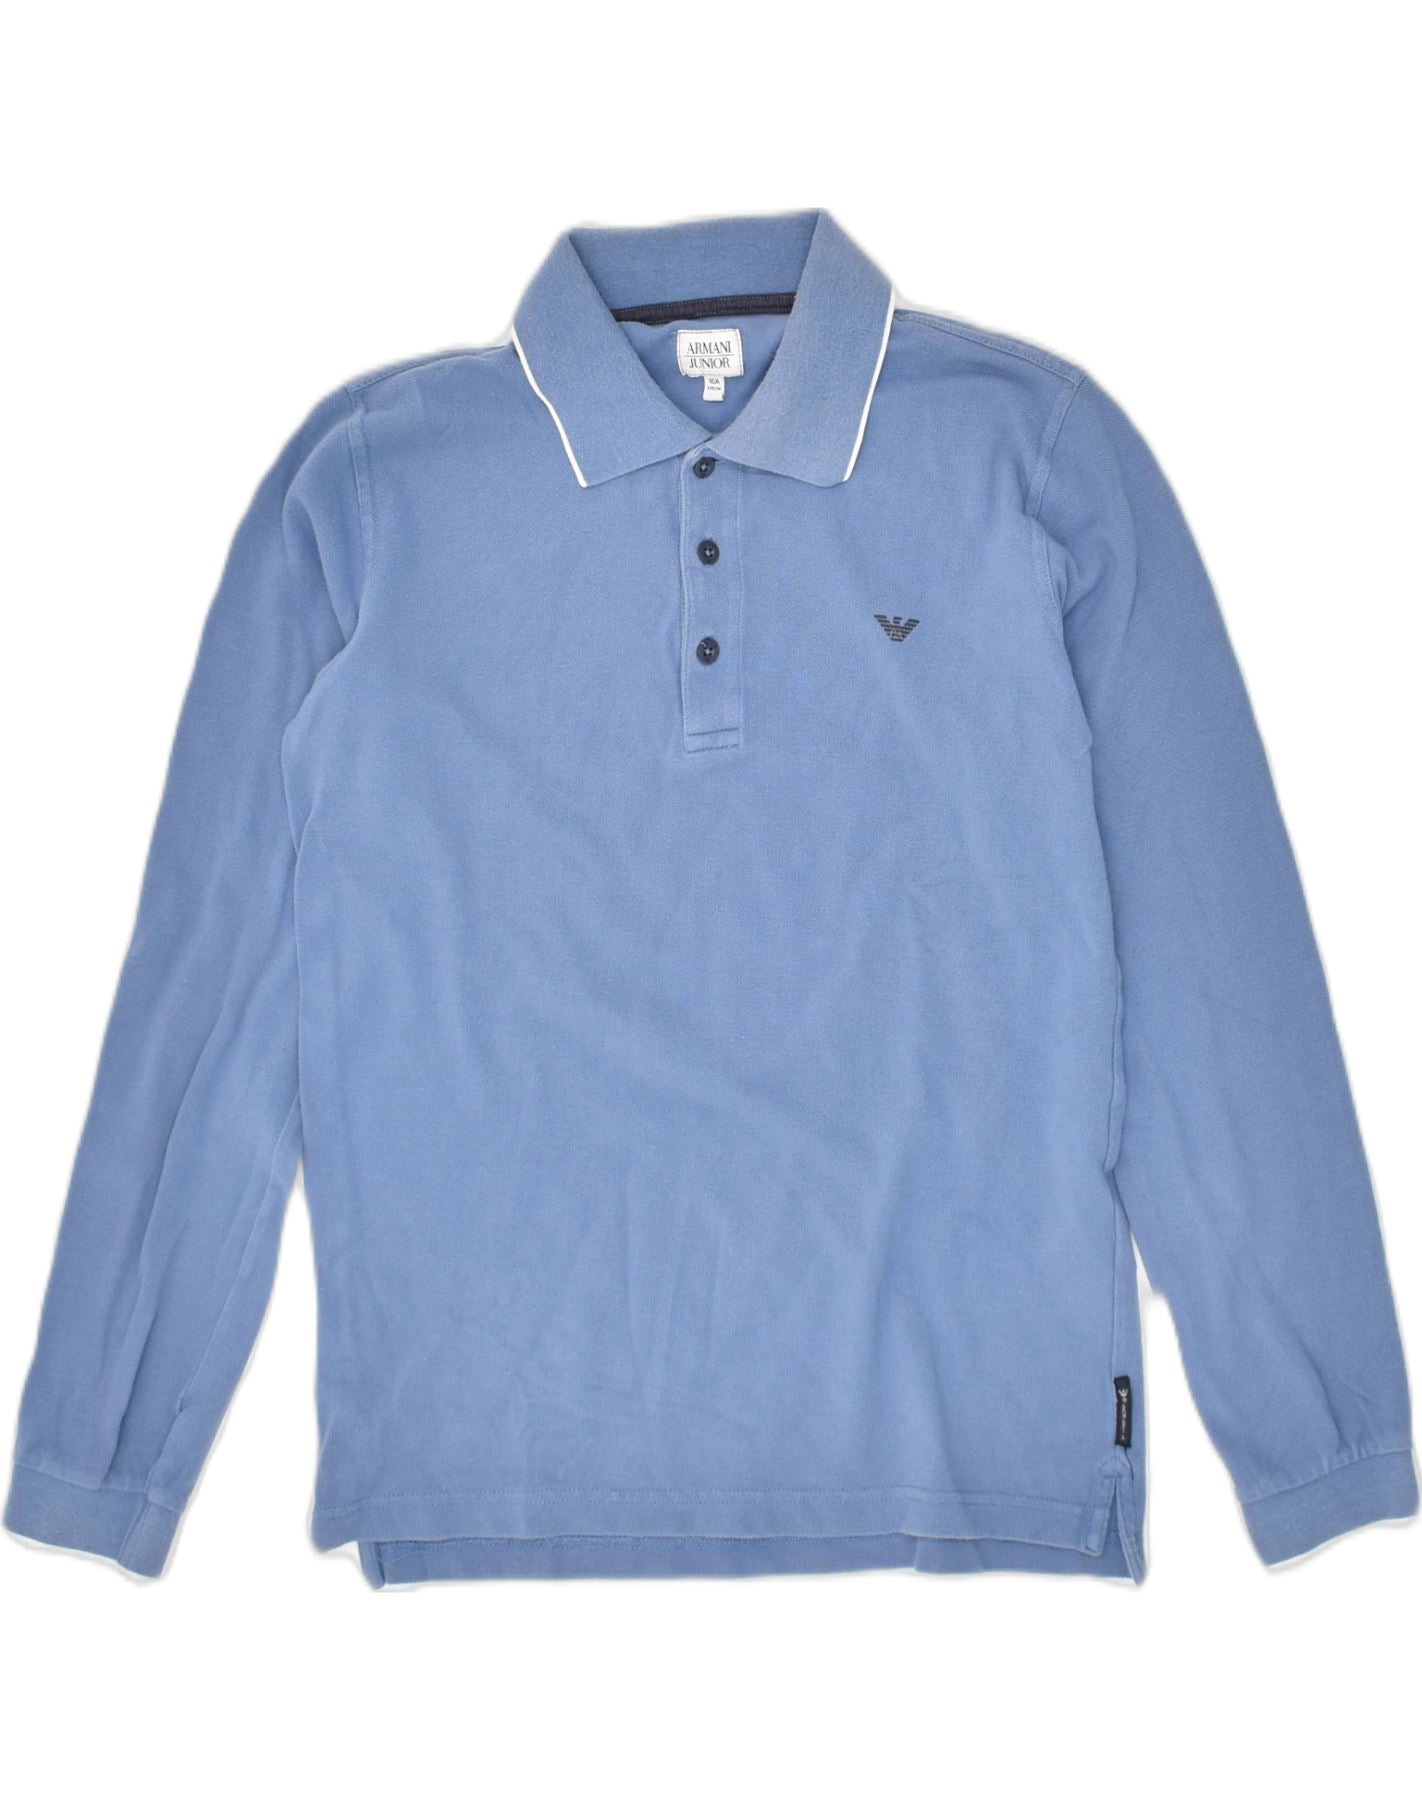 Polyester Eddie Bauer Shirts for Men - Vestiaire Collective